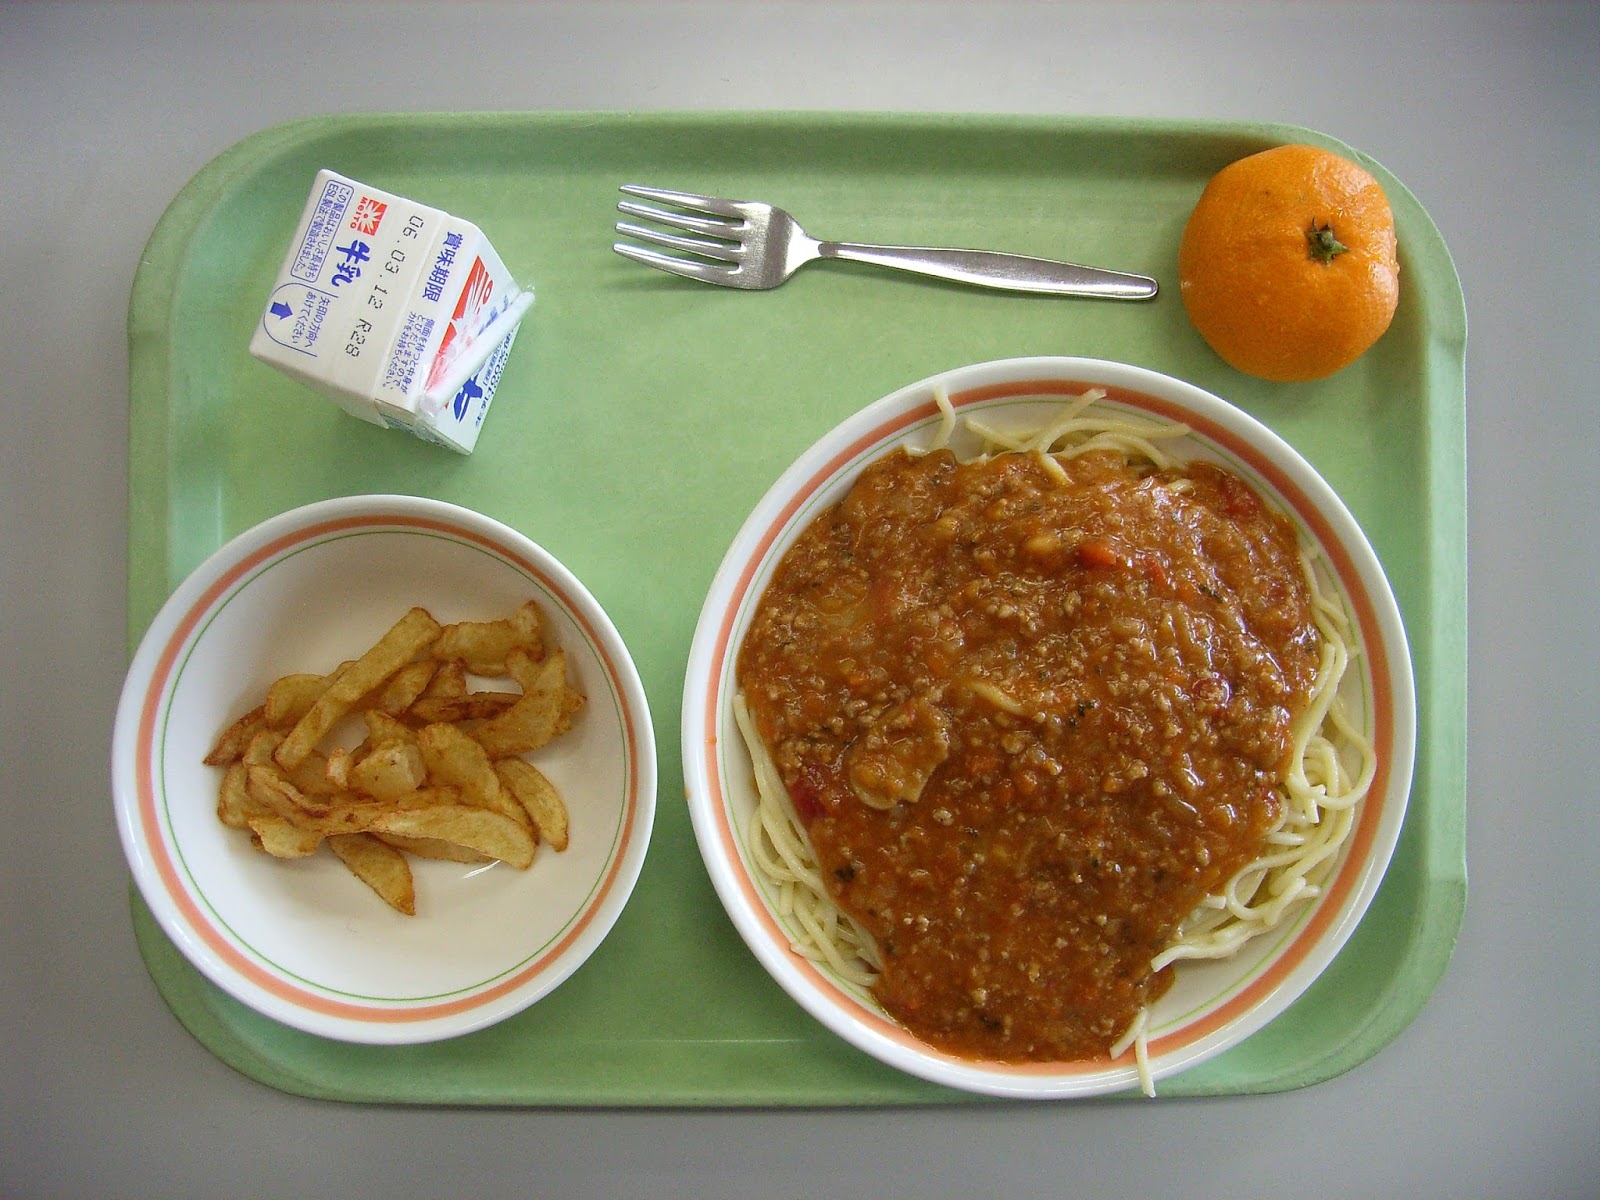 Yusuke Japan Blog Do You Know The School Meal